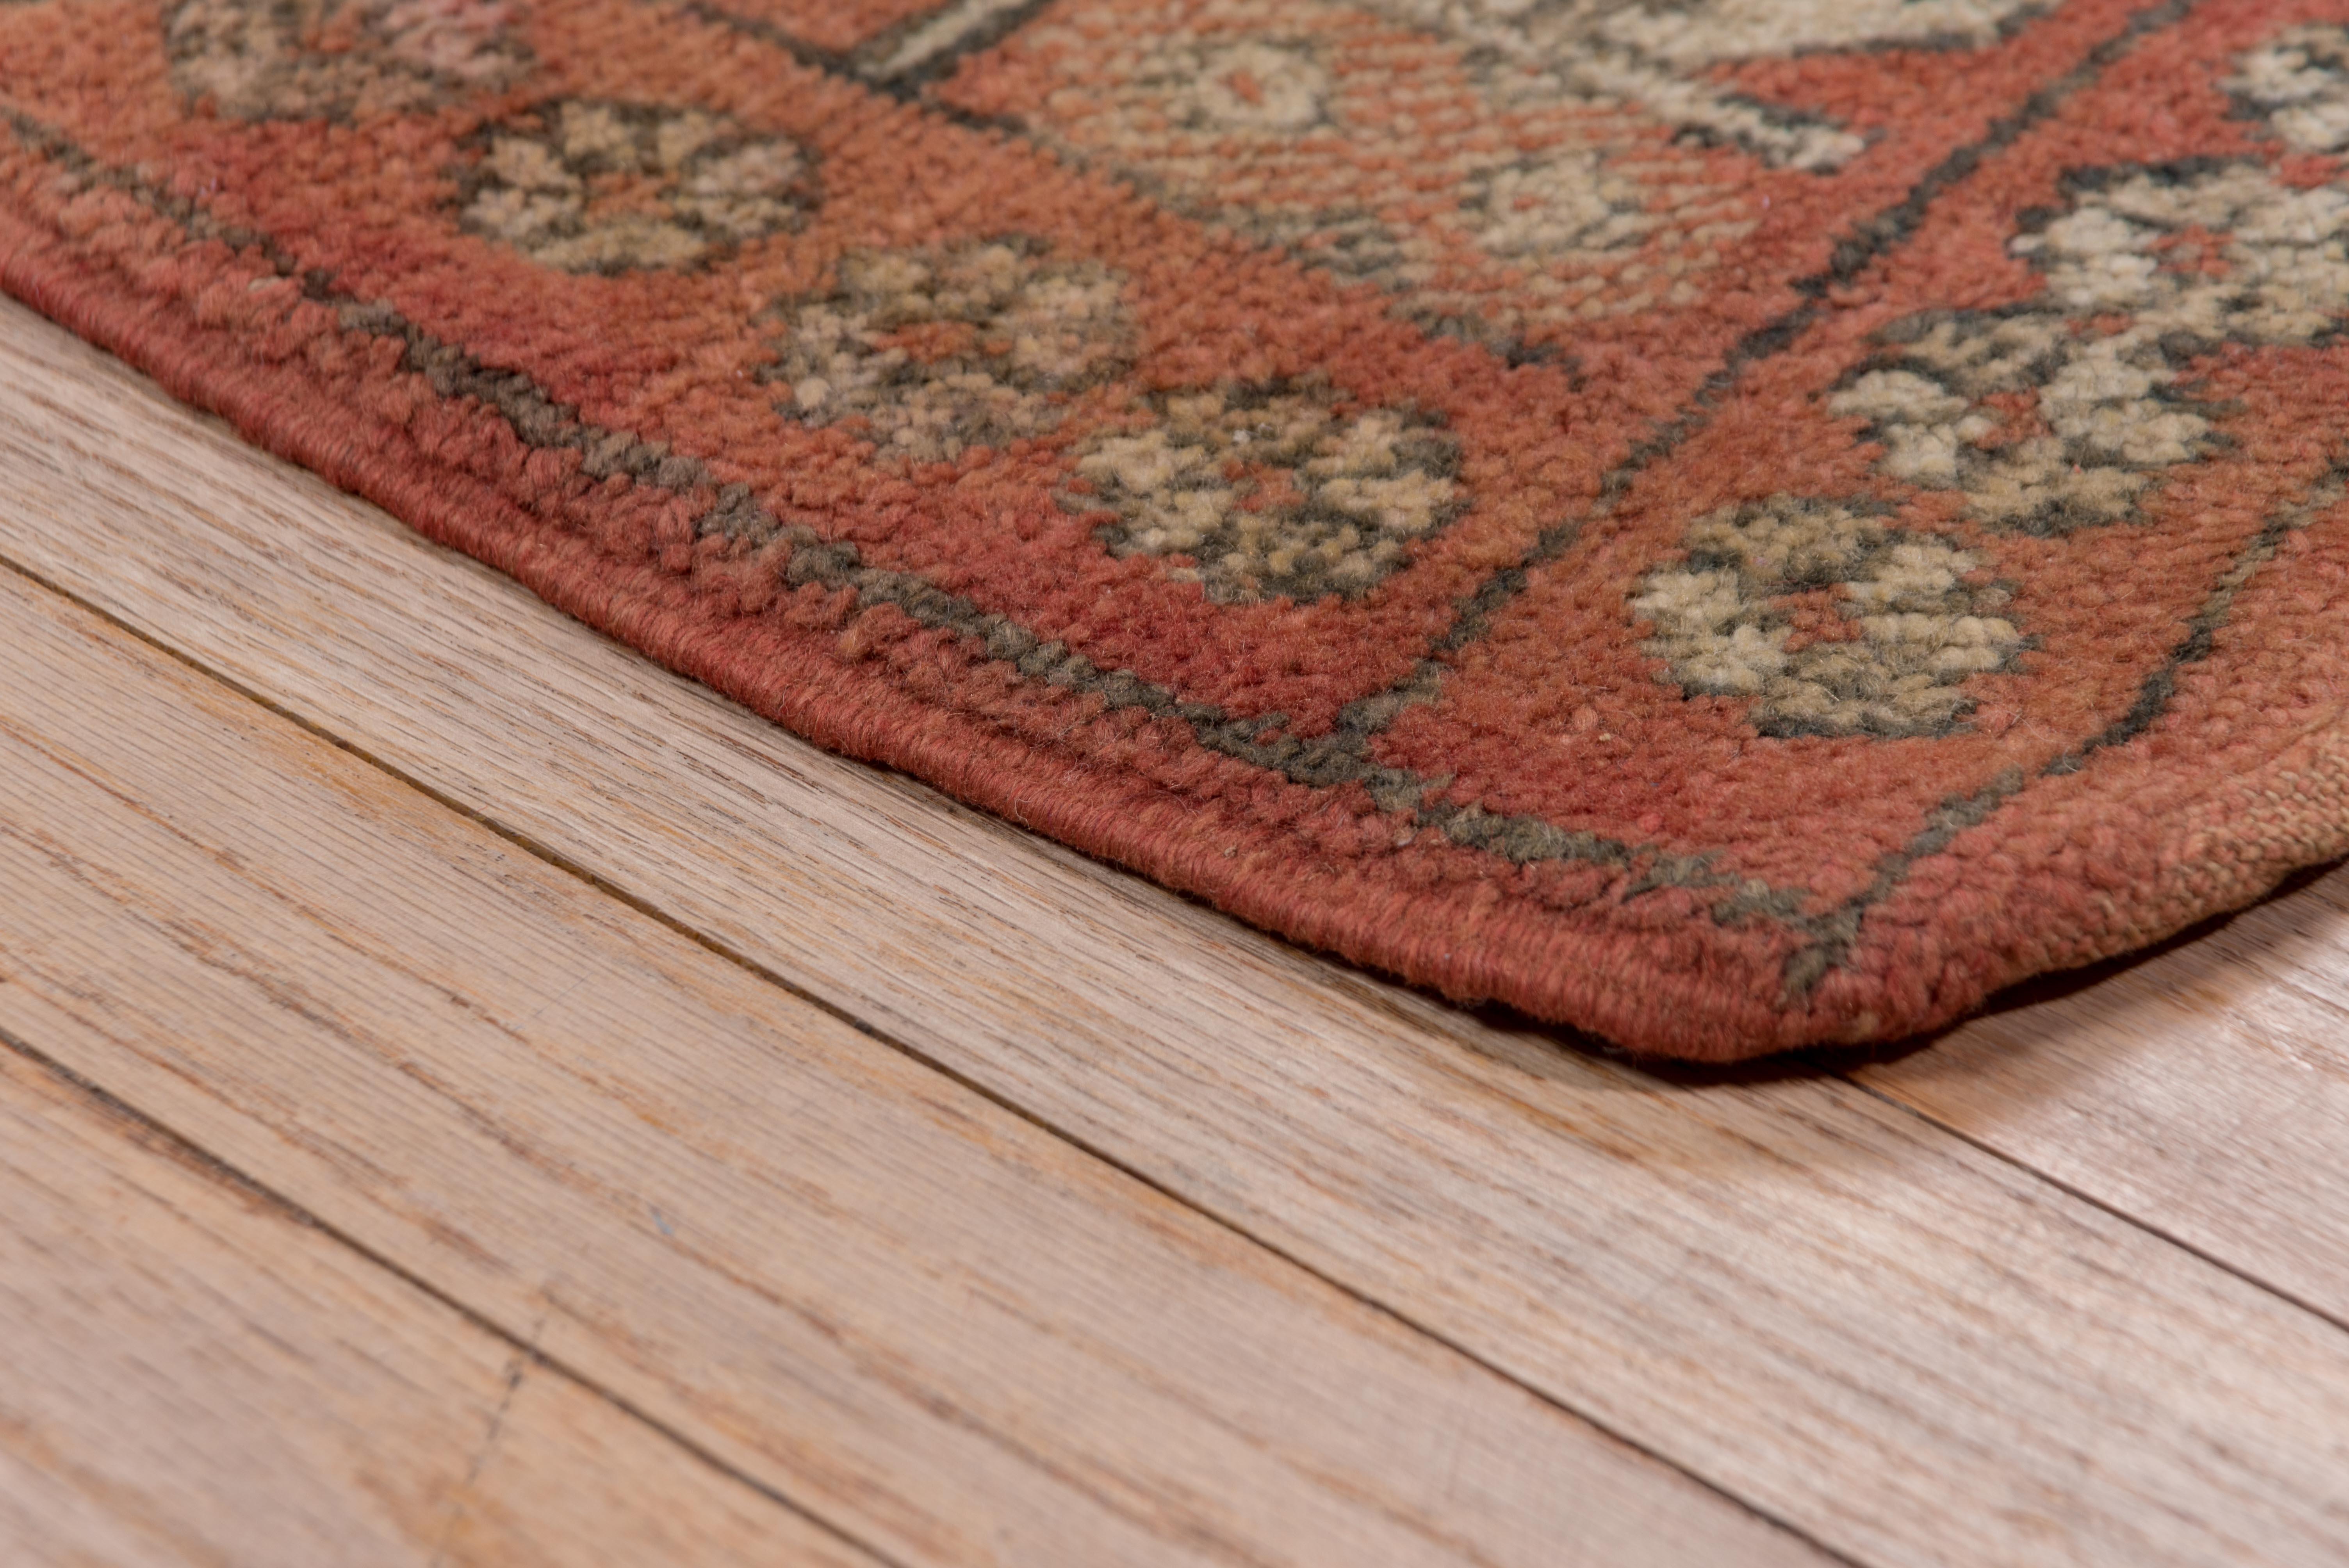 Alternating diamond patterns fill the boxes shaped throughout this gorgeous antique Moroccan village rug. 